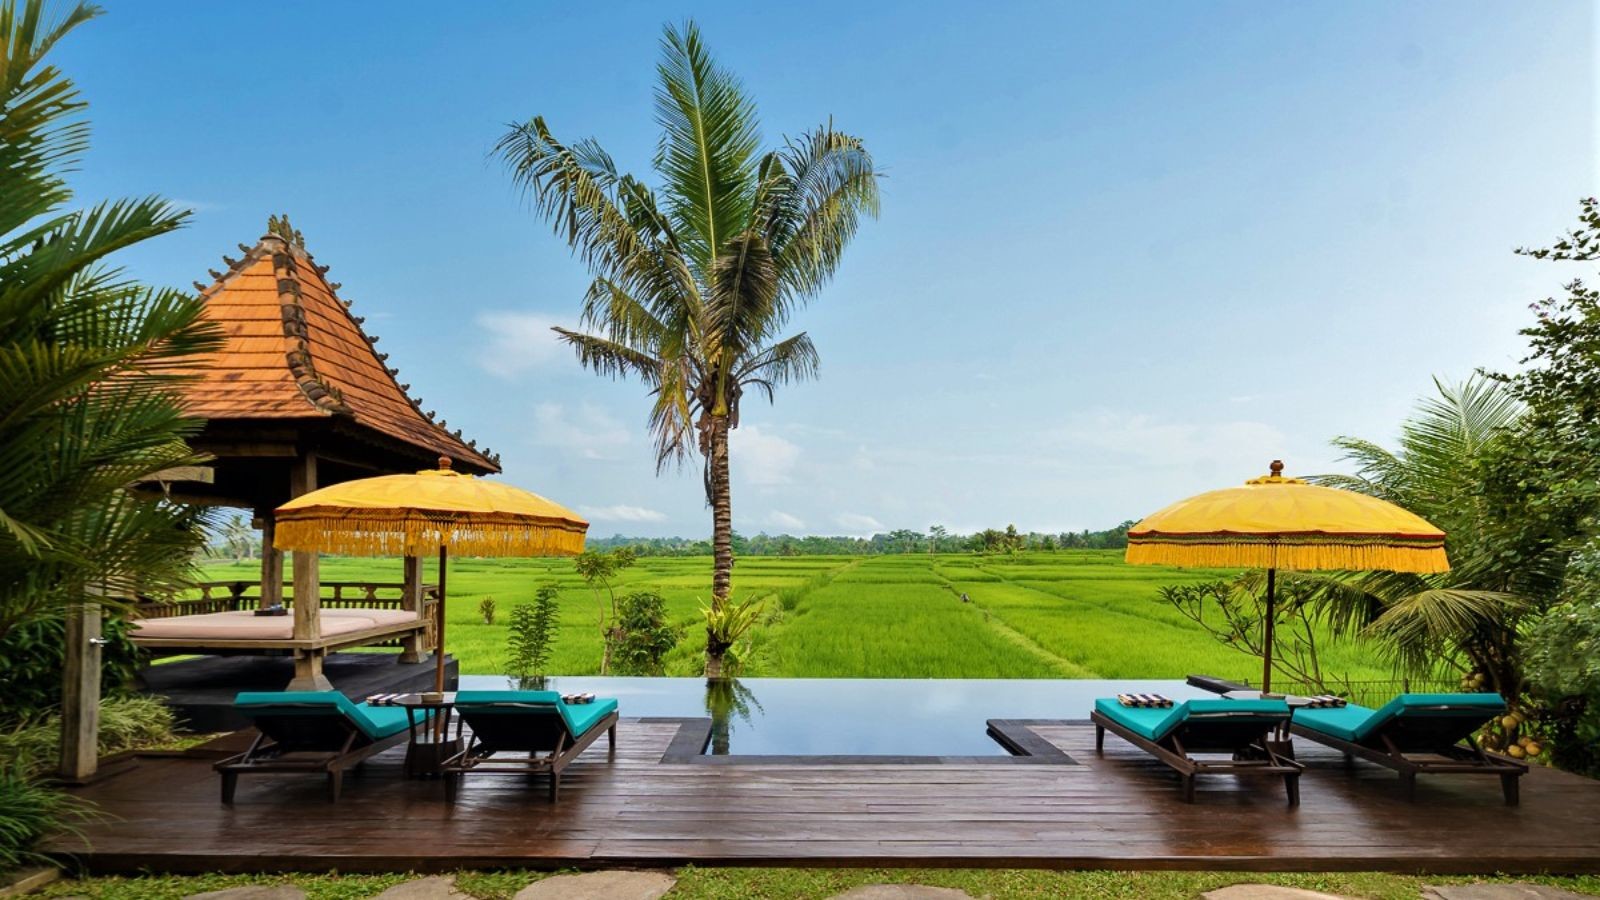 Villa in Ubud with the view  